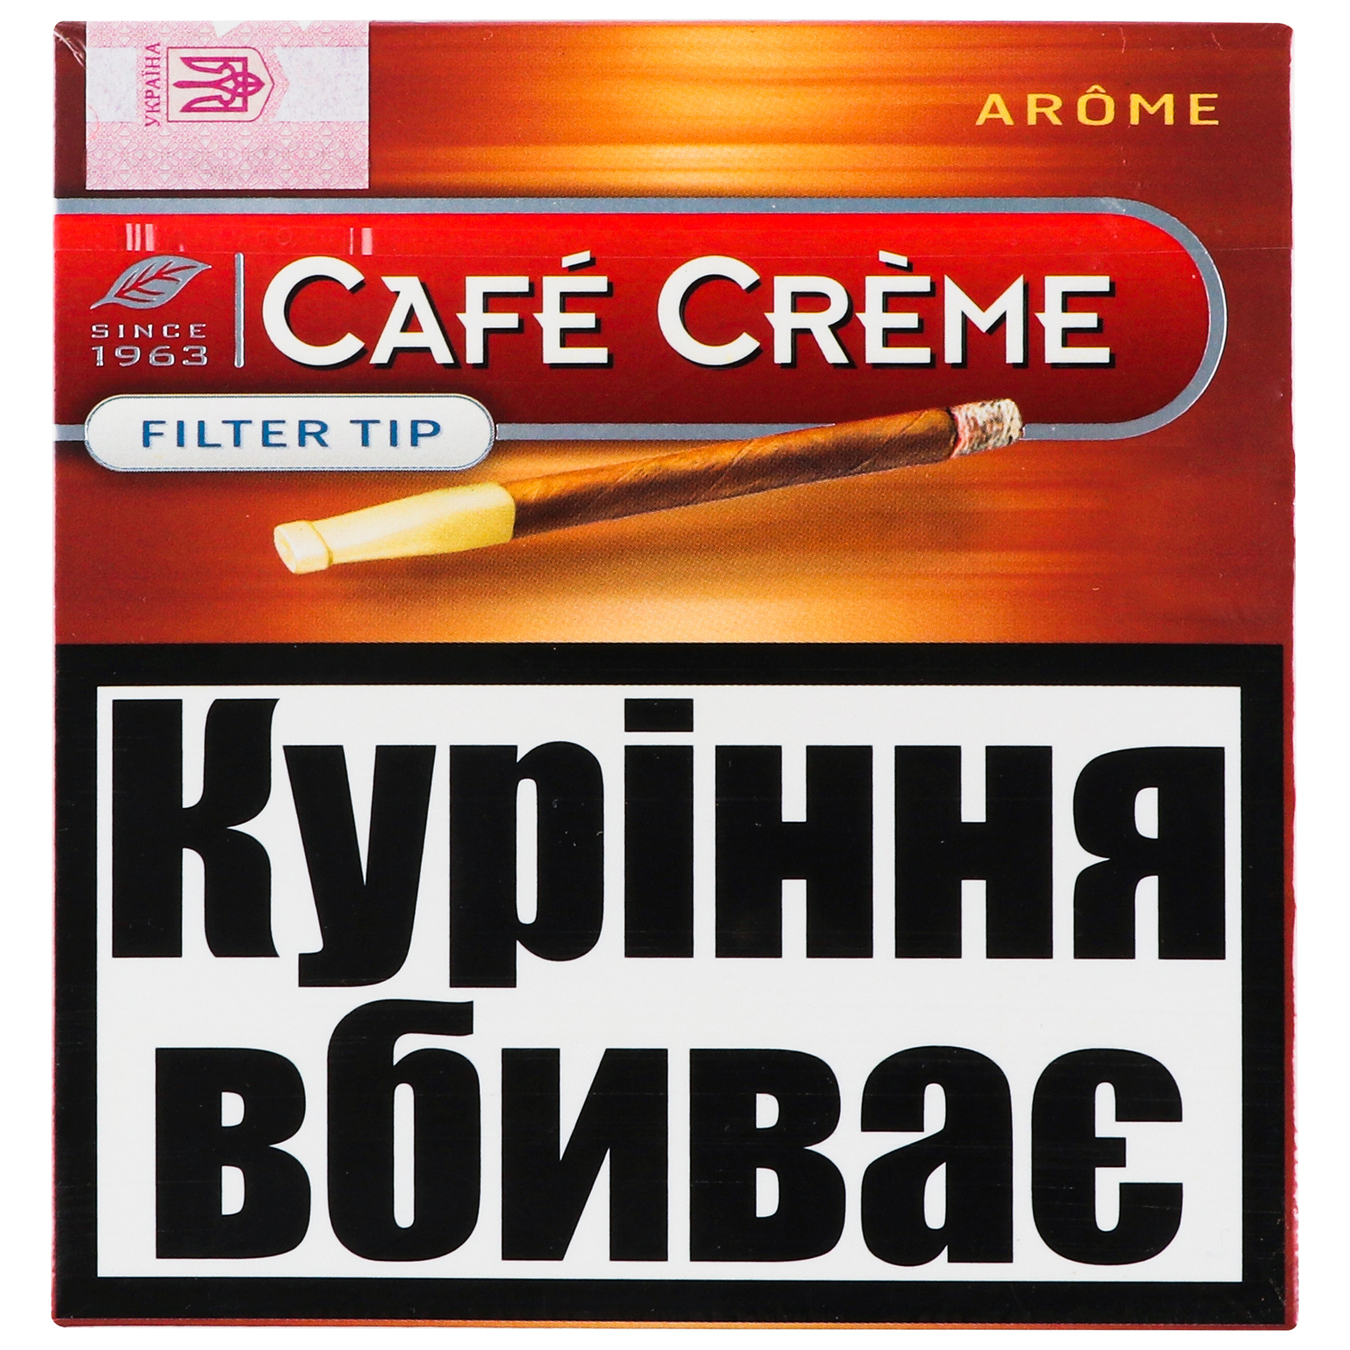 Cigars Cafe Creme Filter Tip Arome 10pcs (the price is without excise tax)